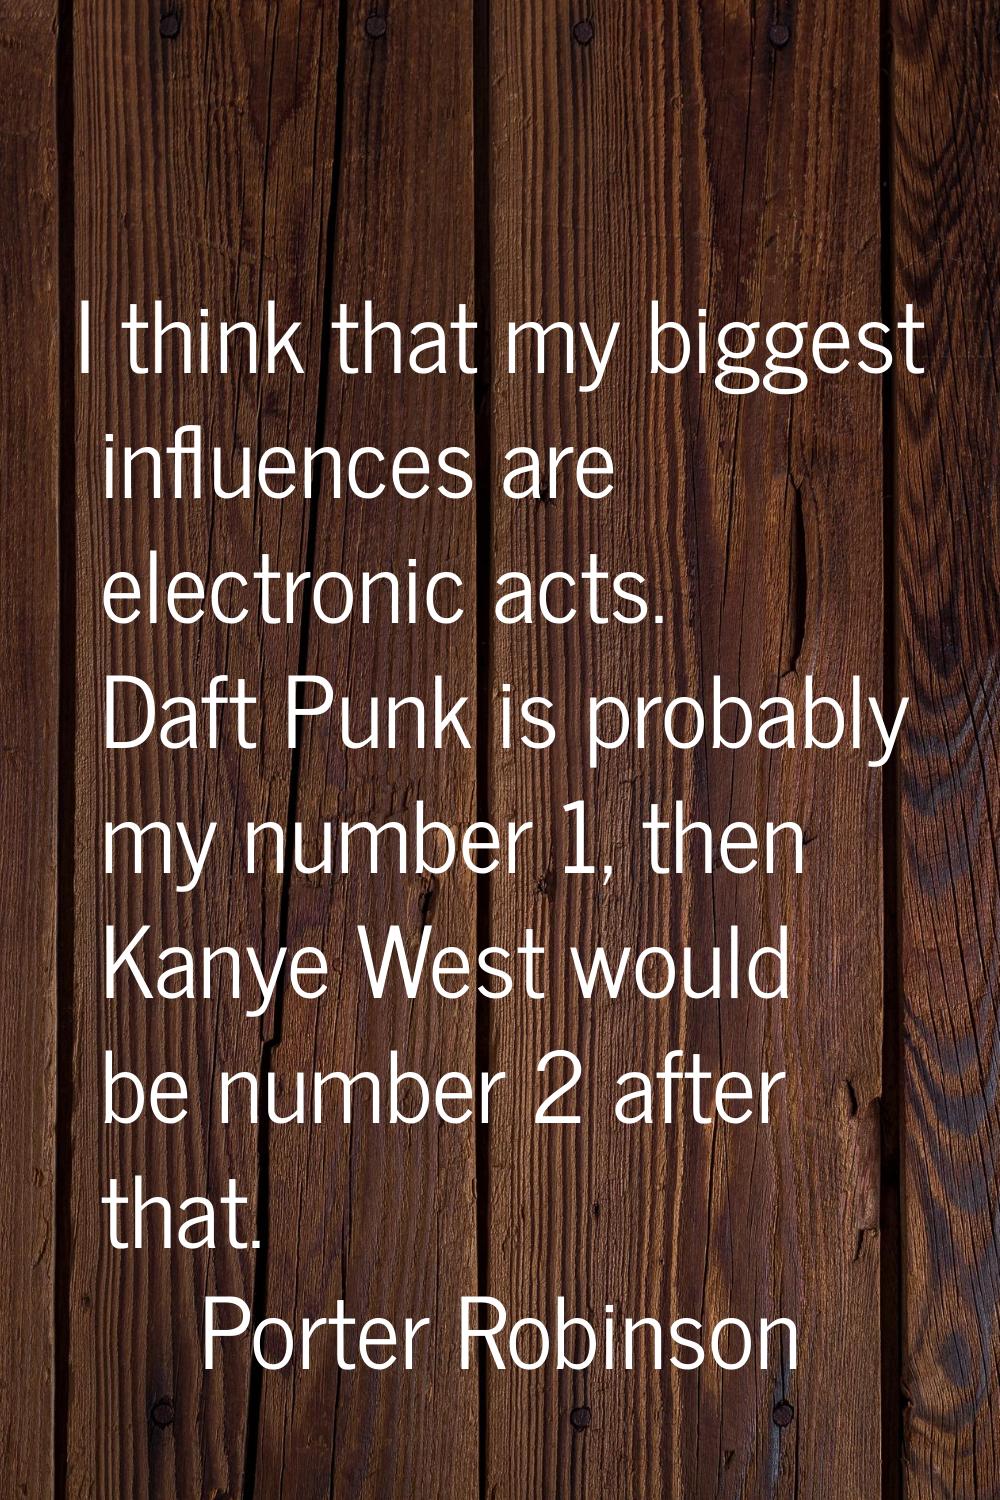 I think that my biggest influences are electronic acts. Daft Punk is probably my number 1, then Kan